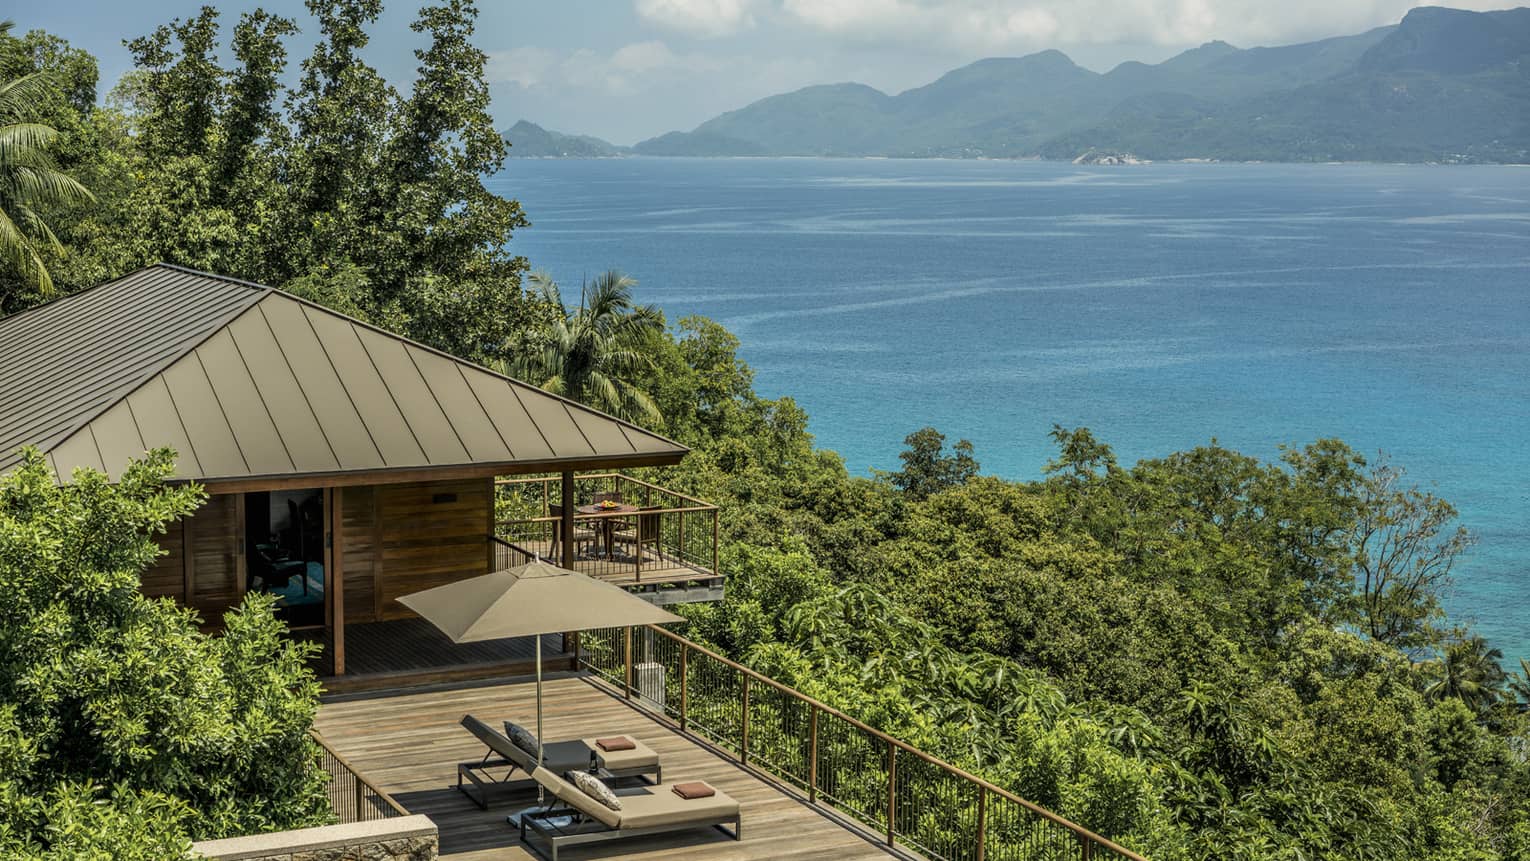 View over wood patio, villa roof on green mountain slope, blue ocean in background